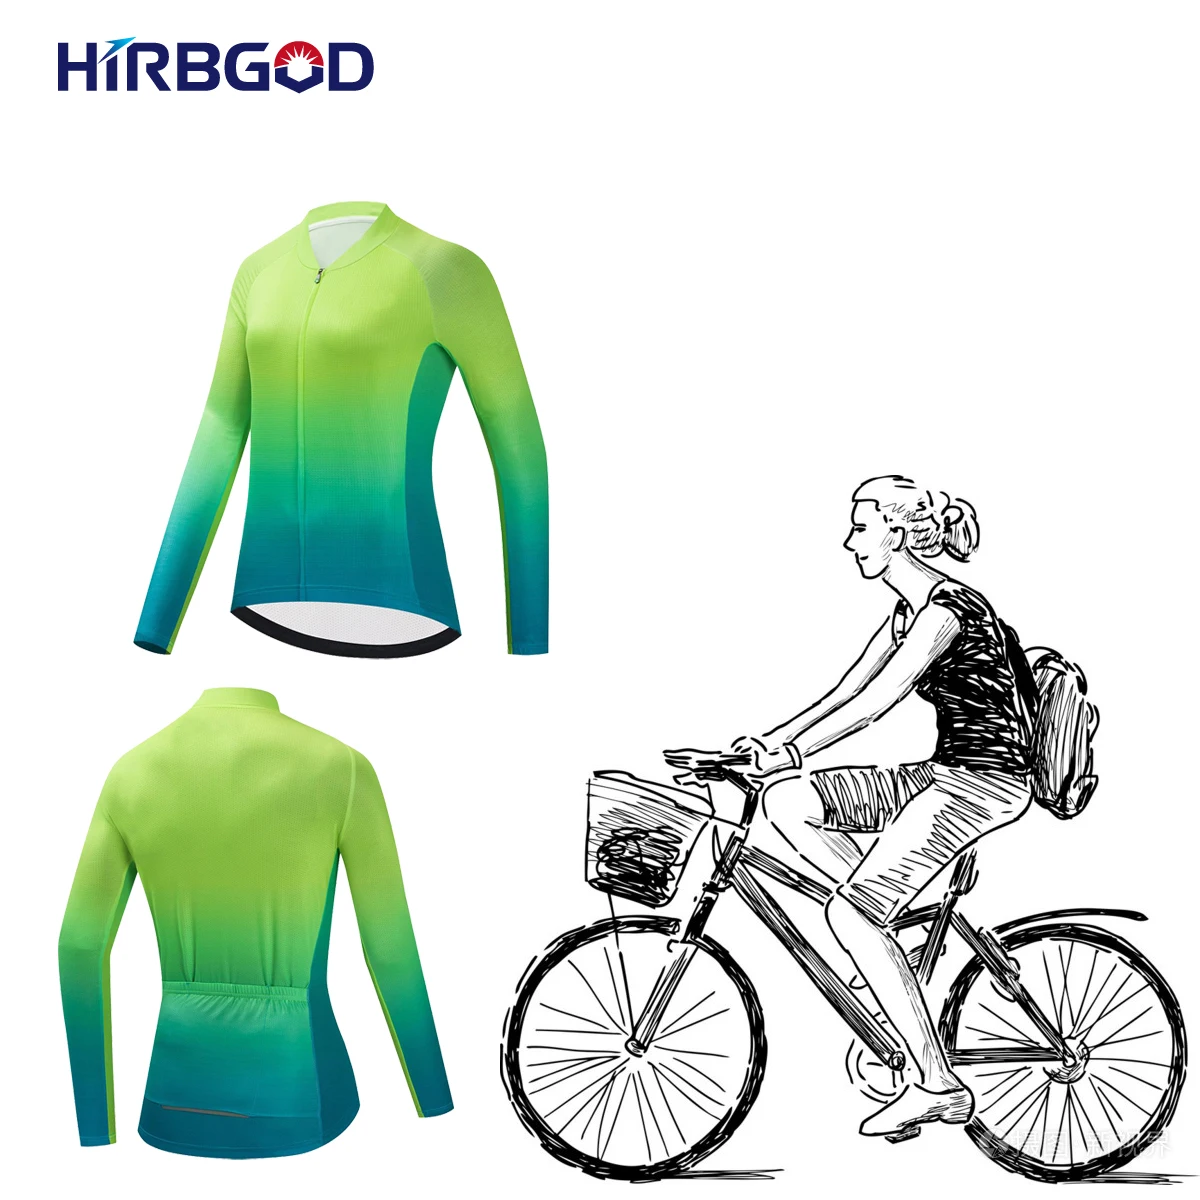 

HIRBGOD High Quality Long Sleeve Cycling Jersey with Reflective Effect MTB Top Women Maillot Bike Green Printing Mountain Shirt